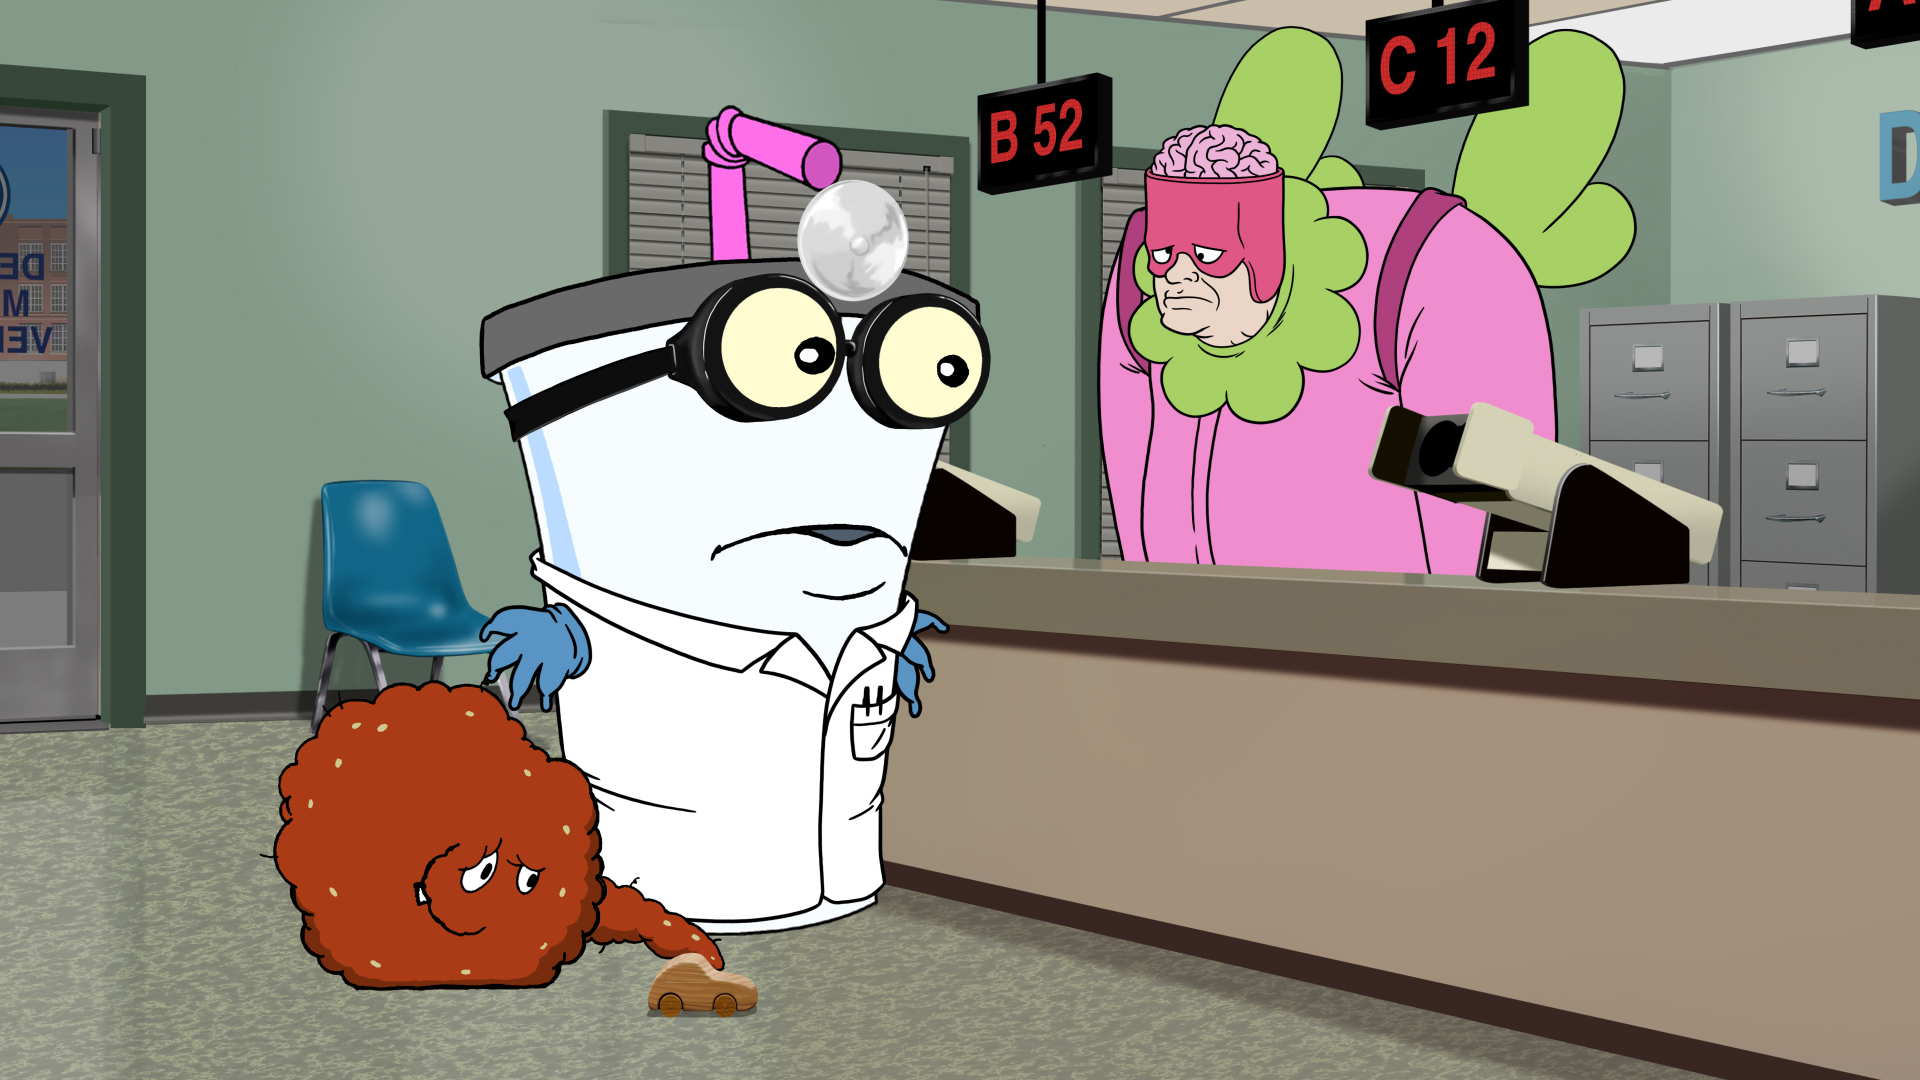 Master Shake (Dana Snyder) attempts to get his driver's license at the DMV in a scene from the final season of Aqua Teen Hunger Force Forever premiering Sunday, June 21st at Midnight (ET, PT) on Adult Swim.